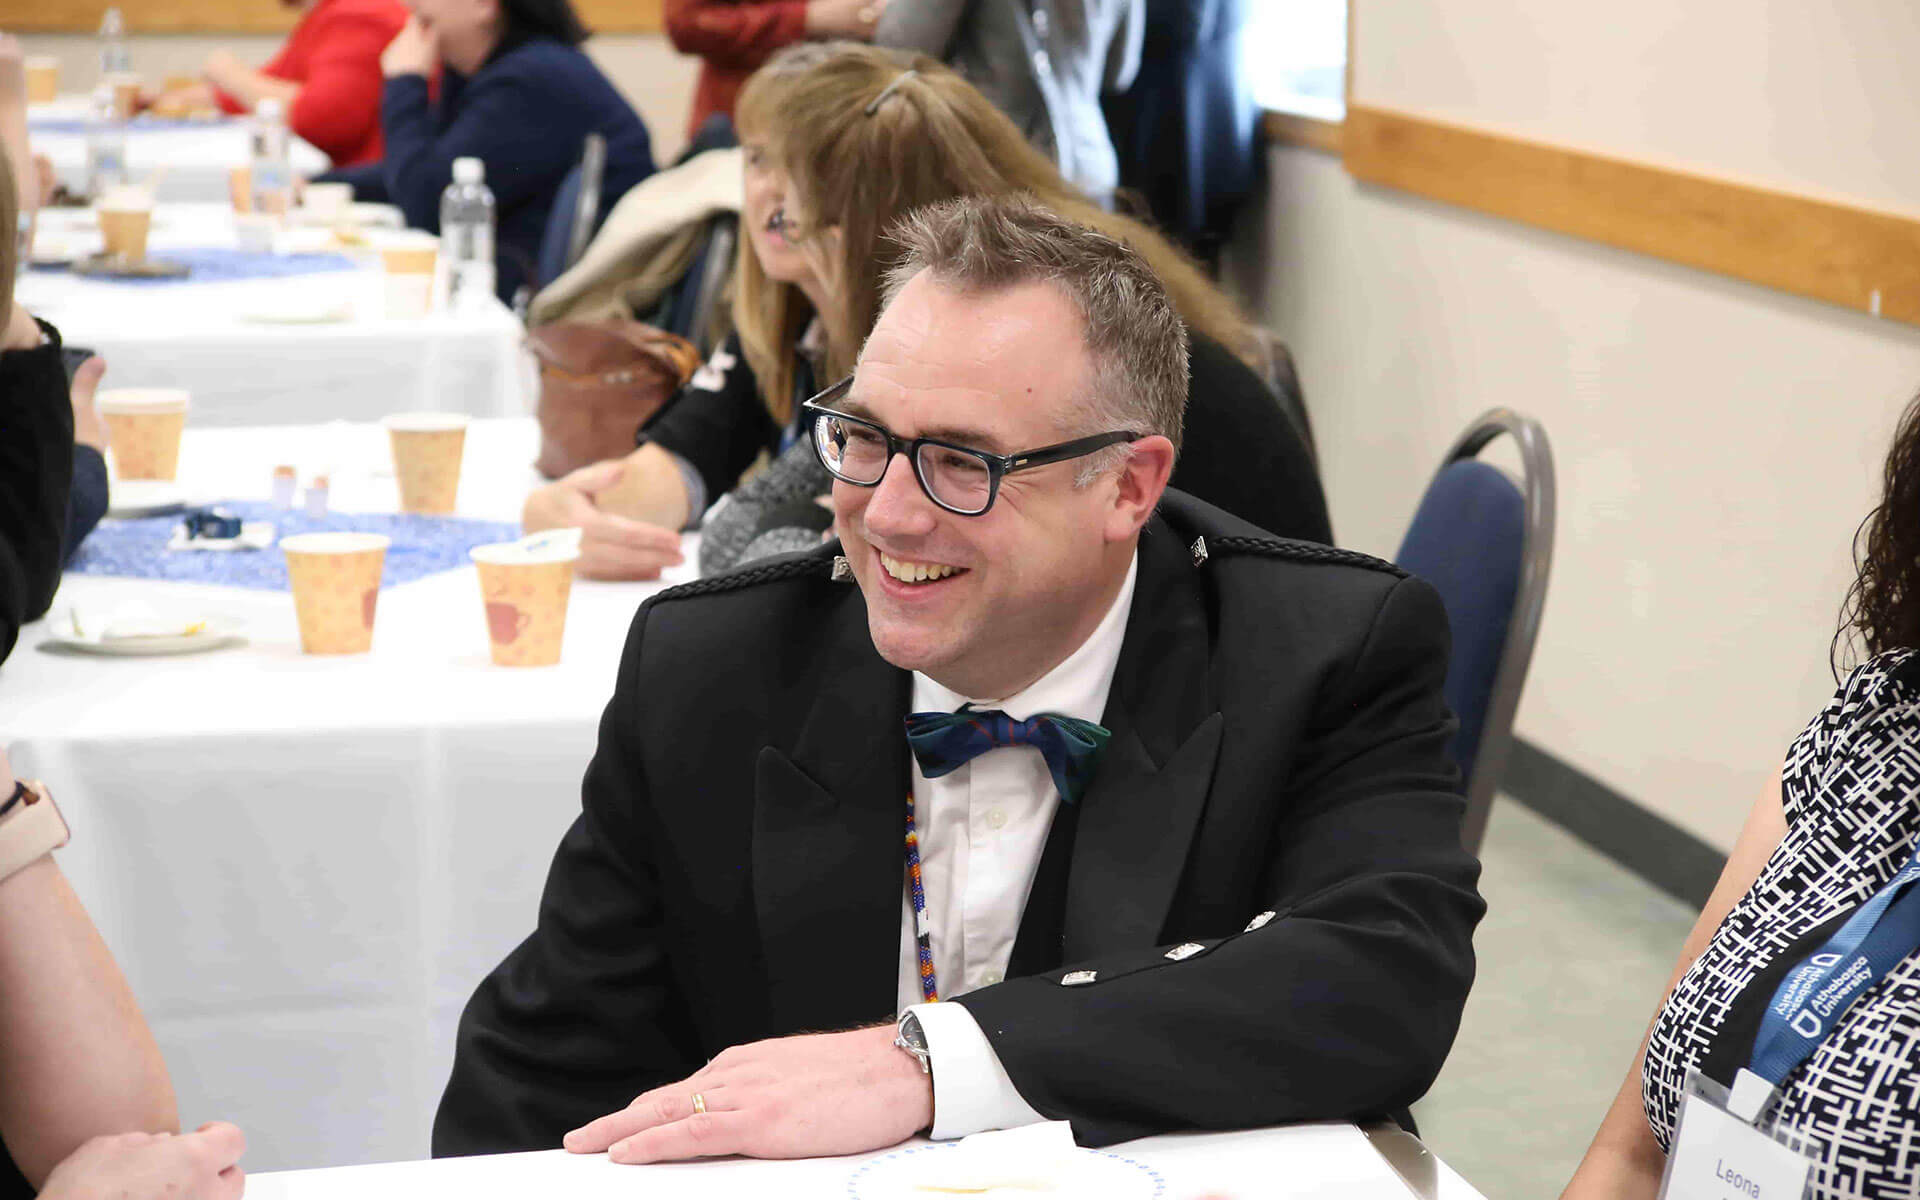 Dr. Alex Clark enjoys a moment during the reception following his installation as university president.